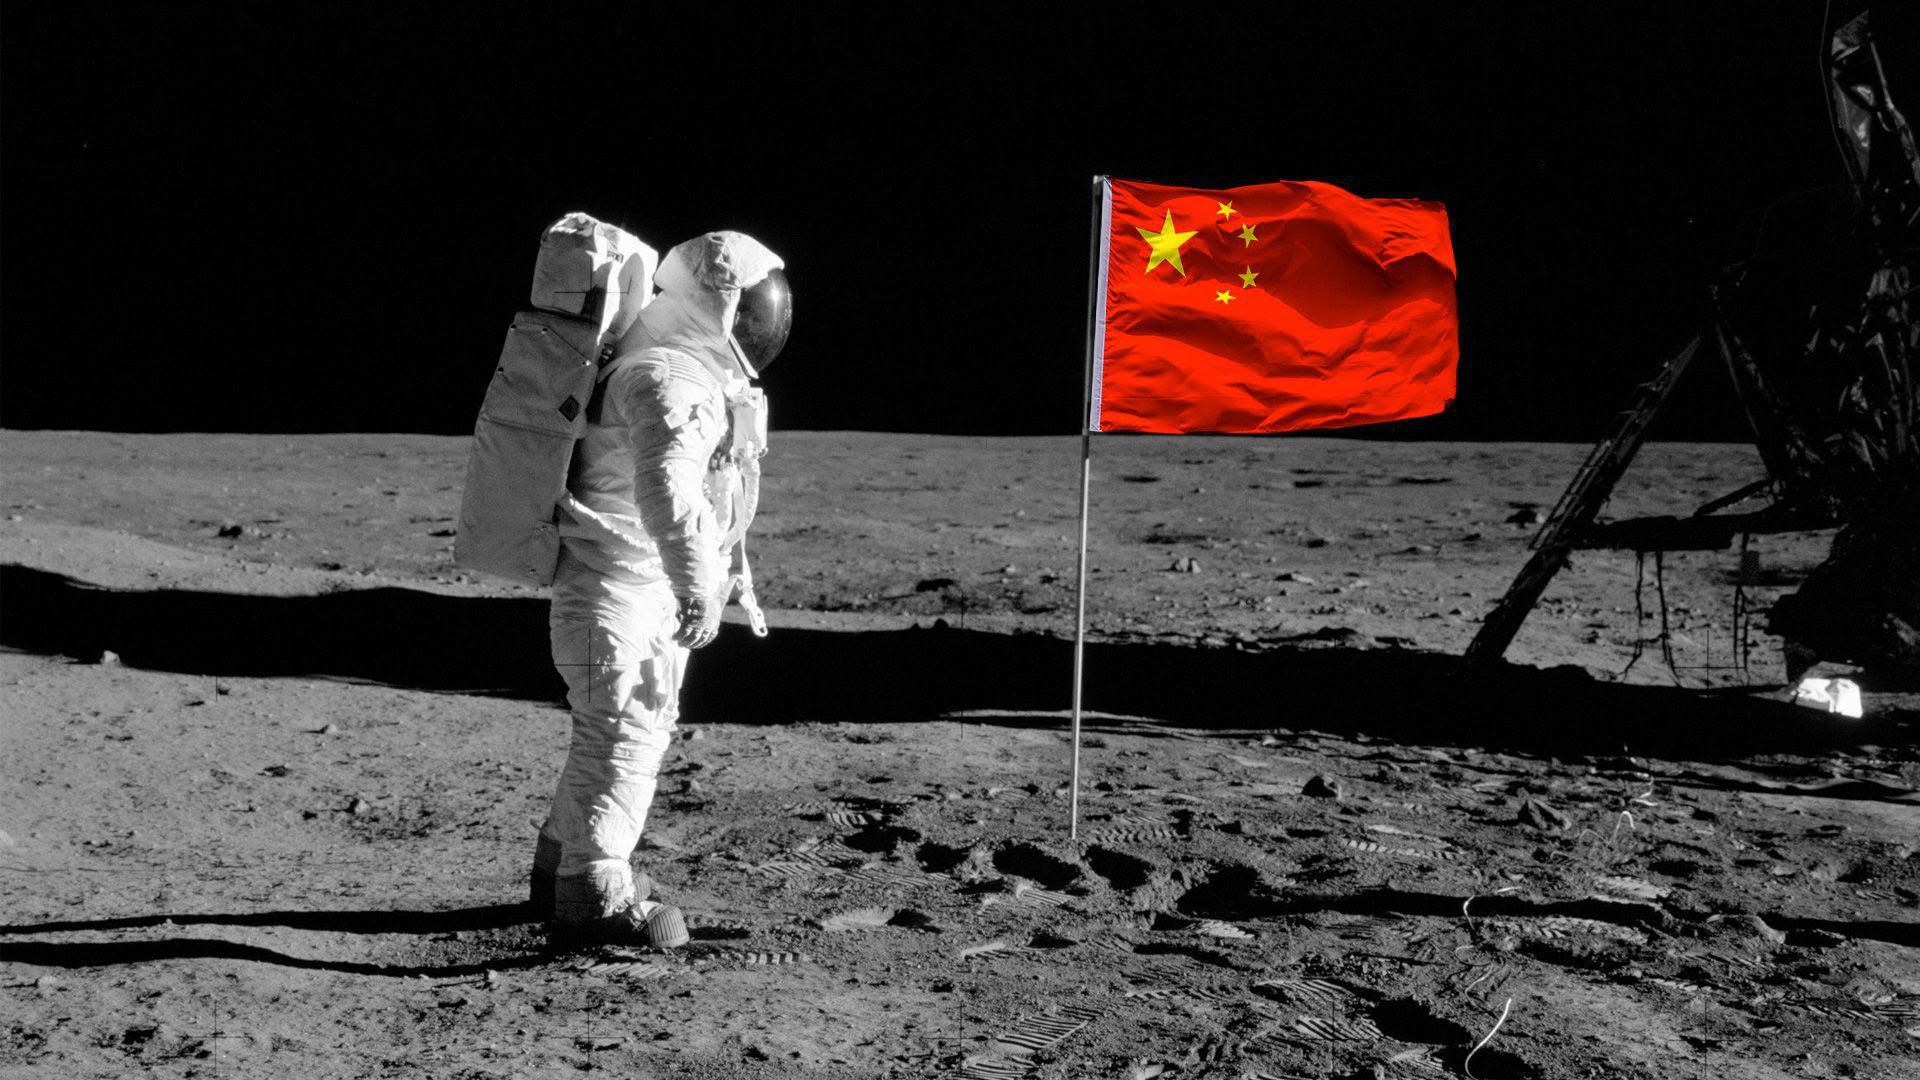 An illustration of a Chinese flag on the moon.